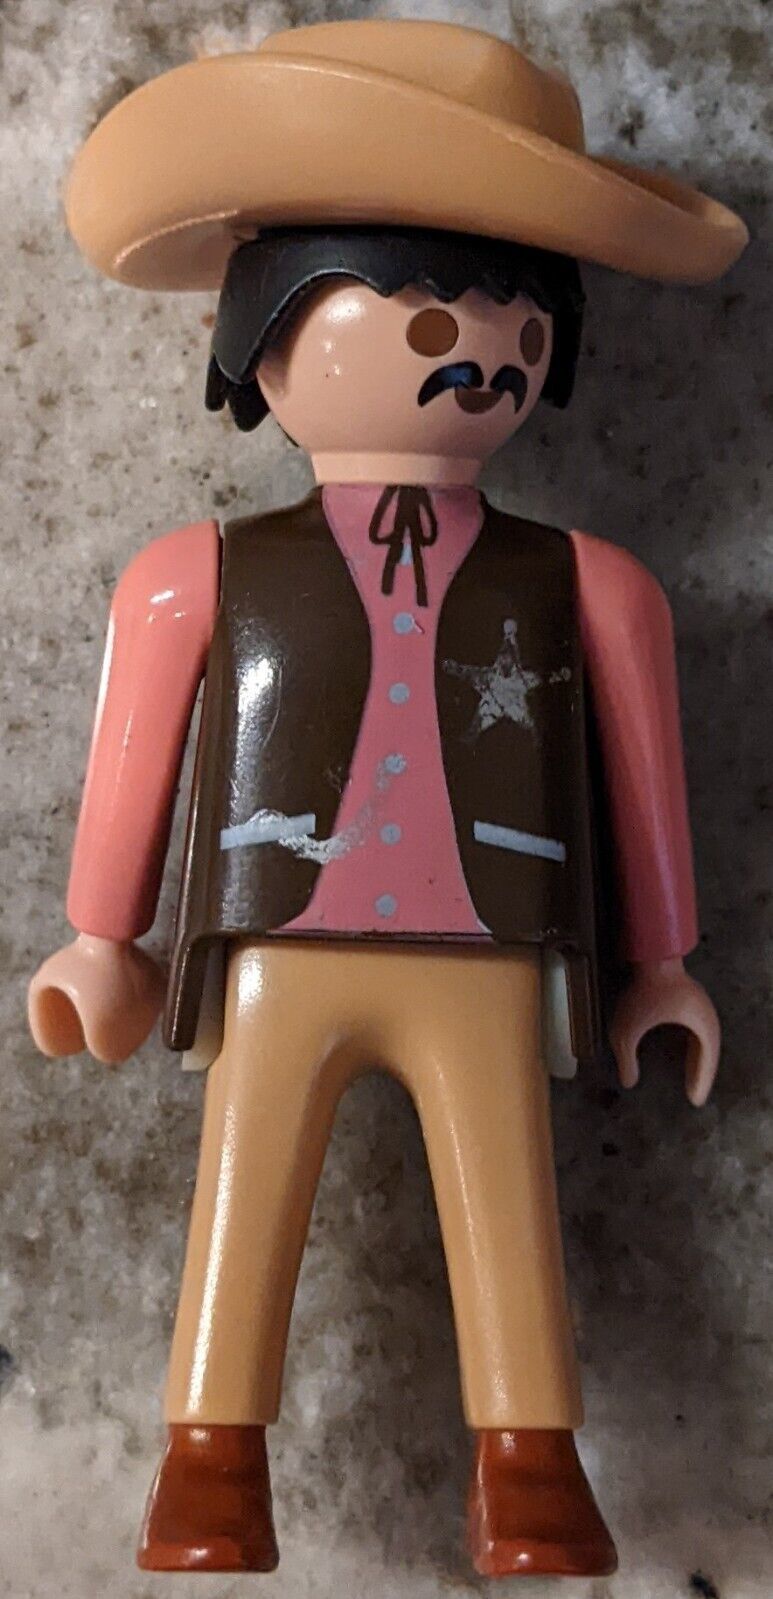 Primary image for Rare Vintage Playmobil Sheriff W/ Cowboy Hat From Blister Pack